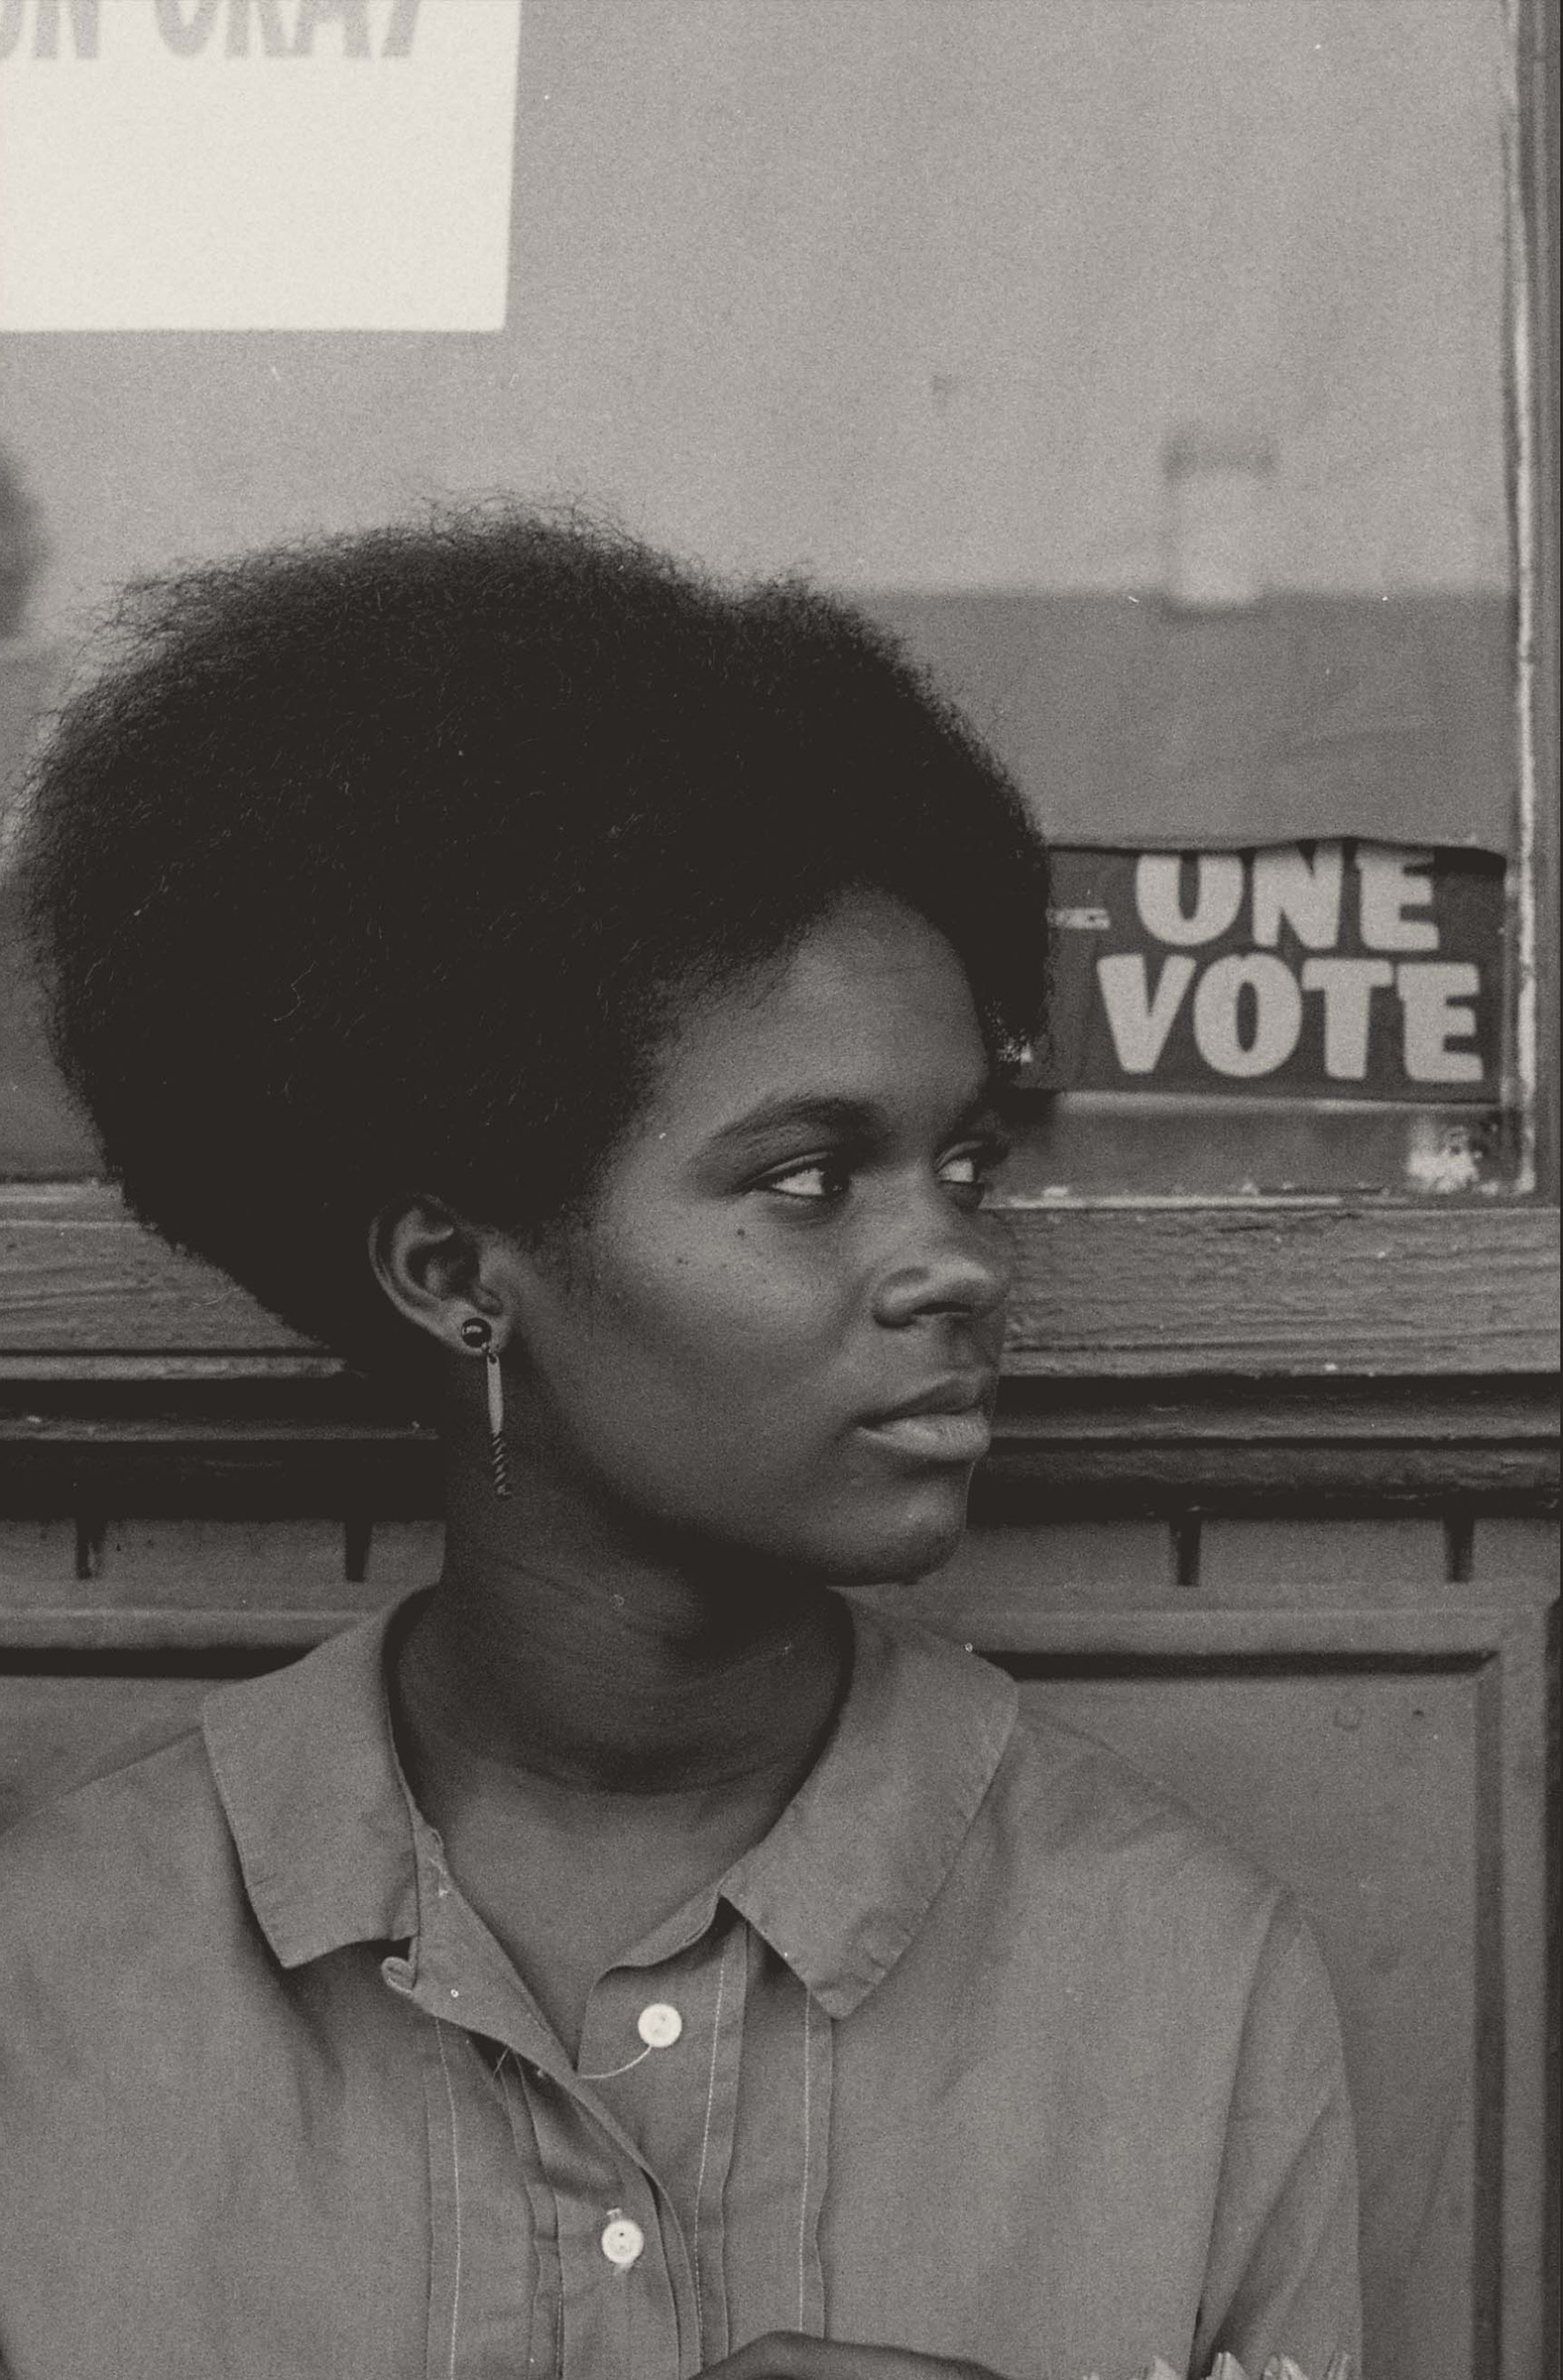 Gracie Hawthorne One Vote, 1964. Photograph by Herbert Randall. Local teenage activist Gracie Hawthorne sits on the steps of the project headquarters in Hattiesburg, Mississippi. Behind her is a SNCC bumper sticker with the Freedom Summer motto, 